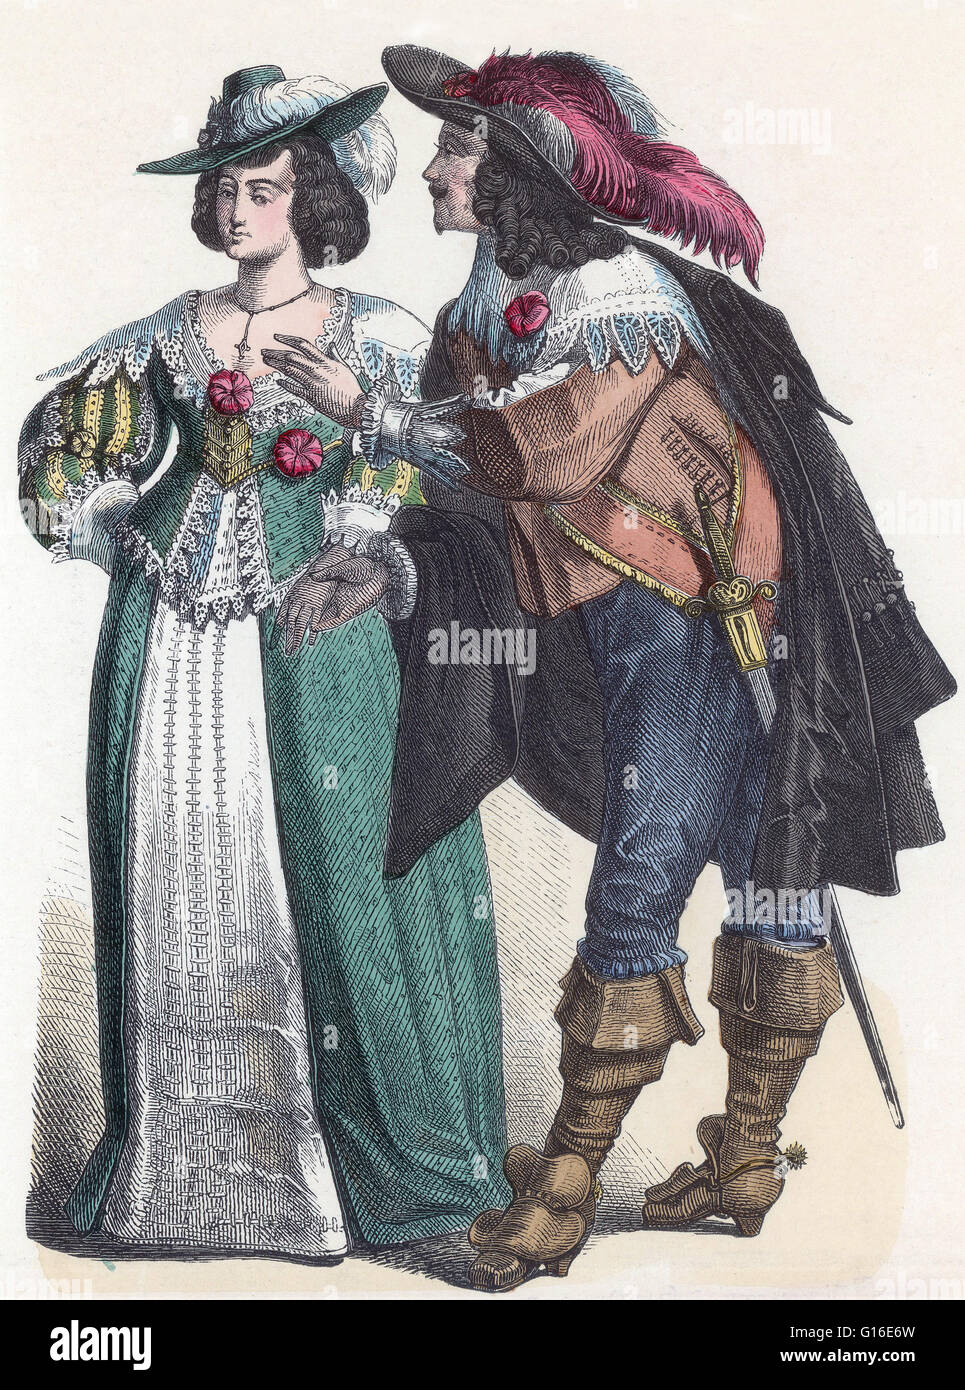 Entitled: 'German nobility of the Baroque period.' Fashion in the period 1600-50 in Western European clothing is characterized by the disappearance of the ruff in favor of broad lace or linen collars. Waistlines rose through the period for both men and wo Stock Photo